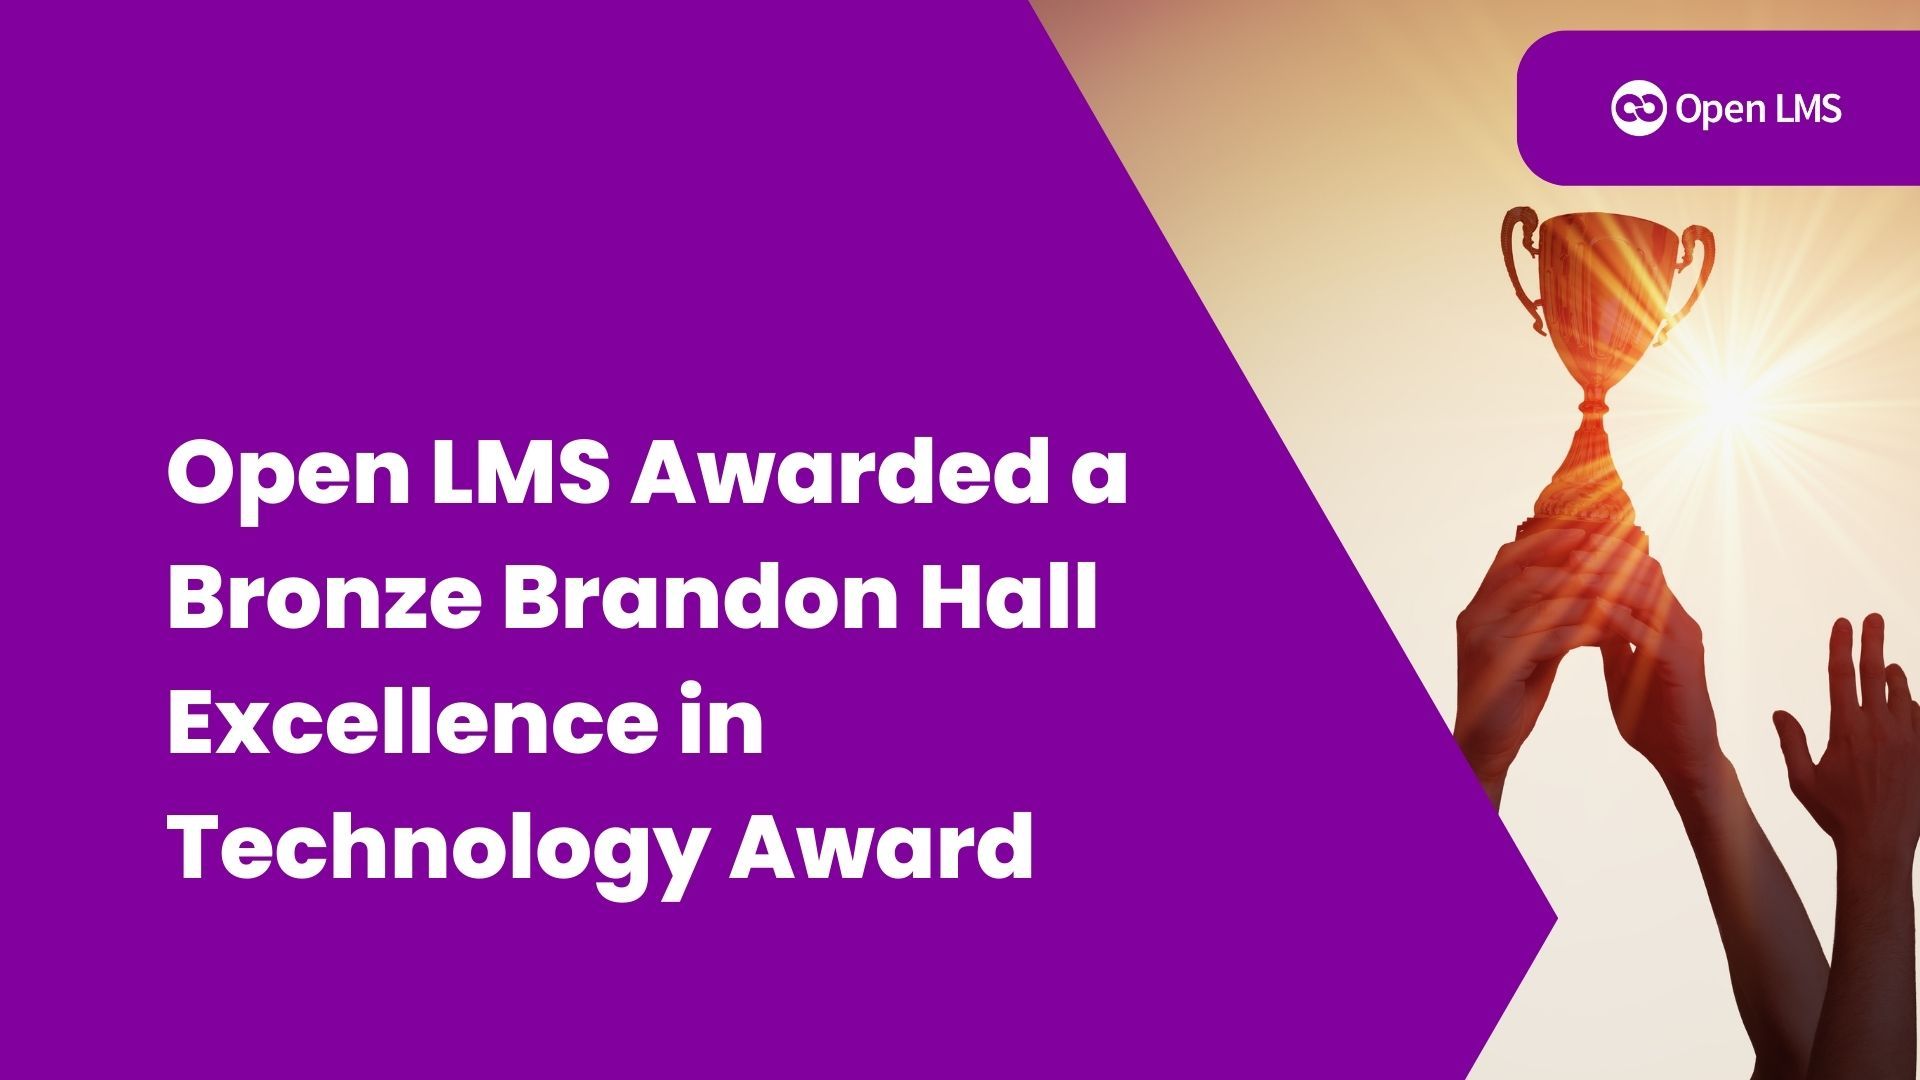 Open LMS Awarded a Bronze Brandon Hall Excellence in Technology Award